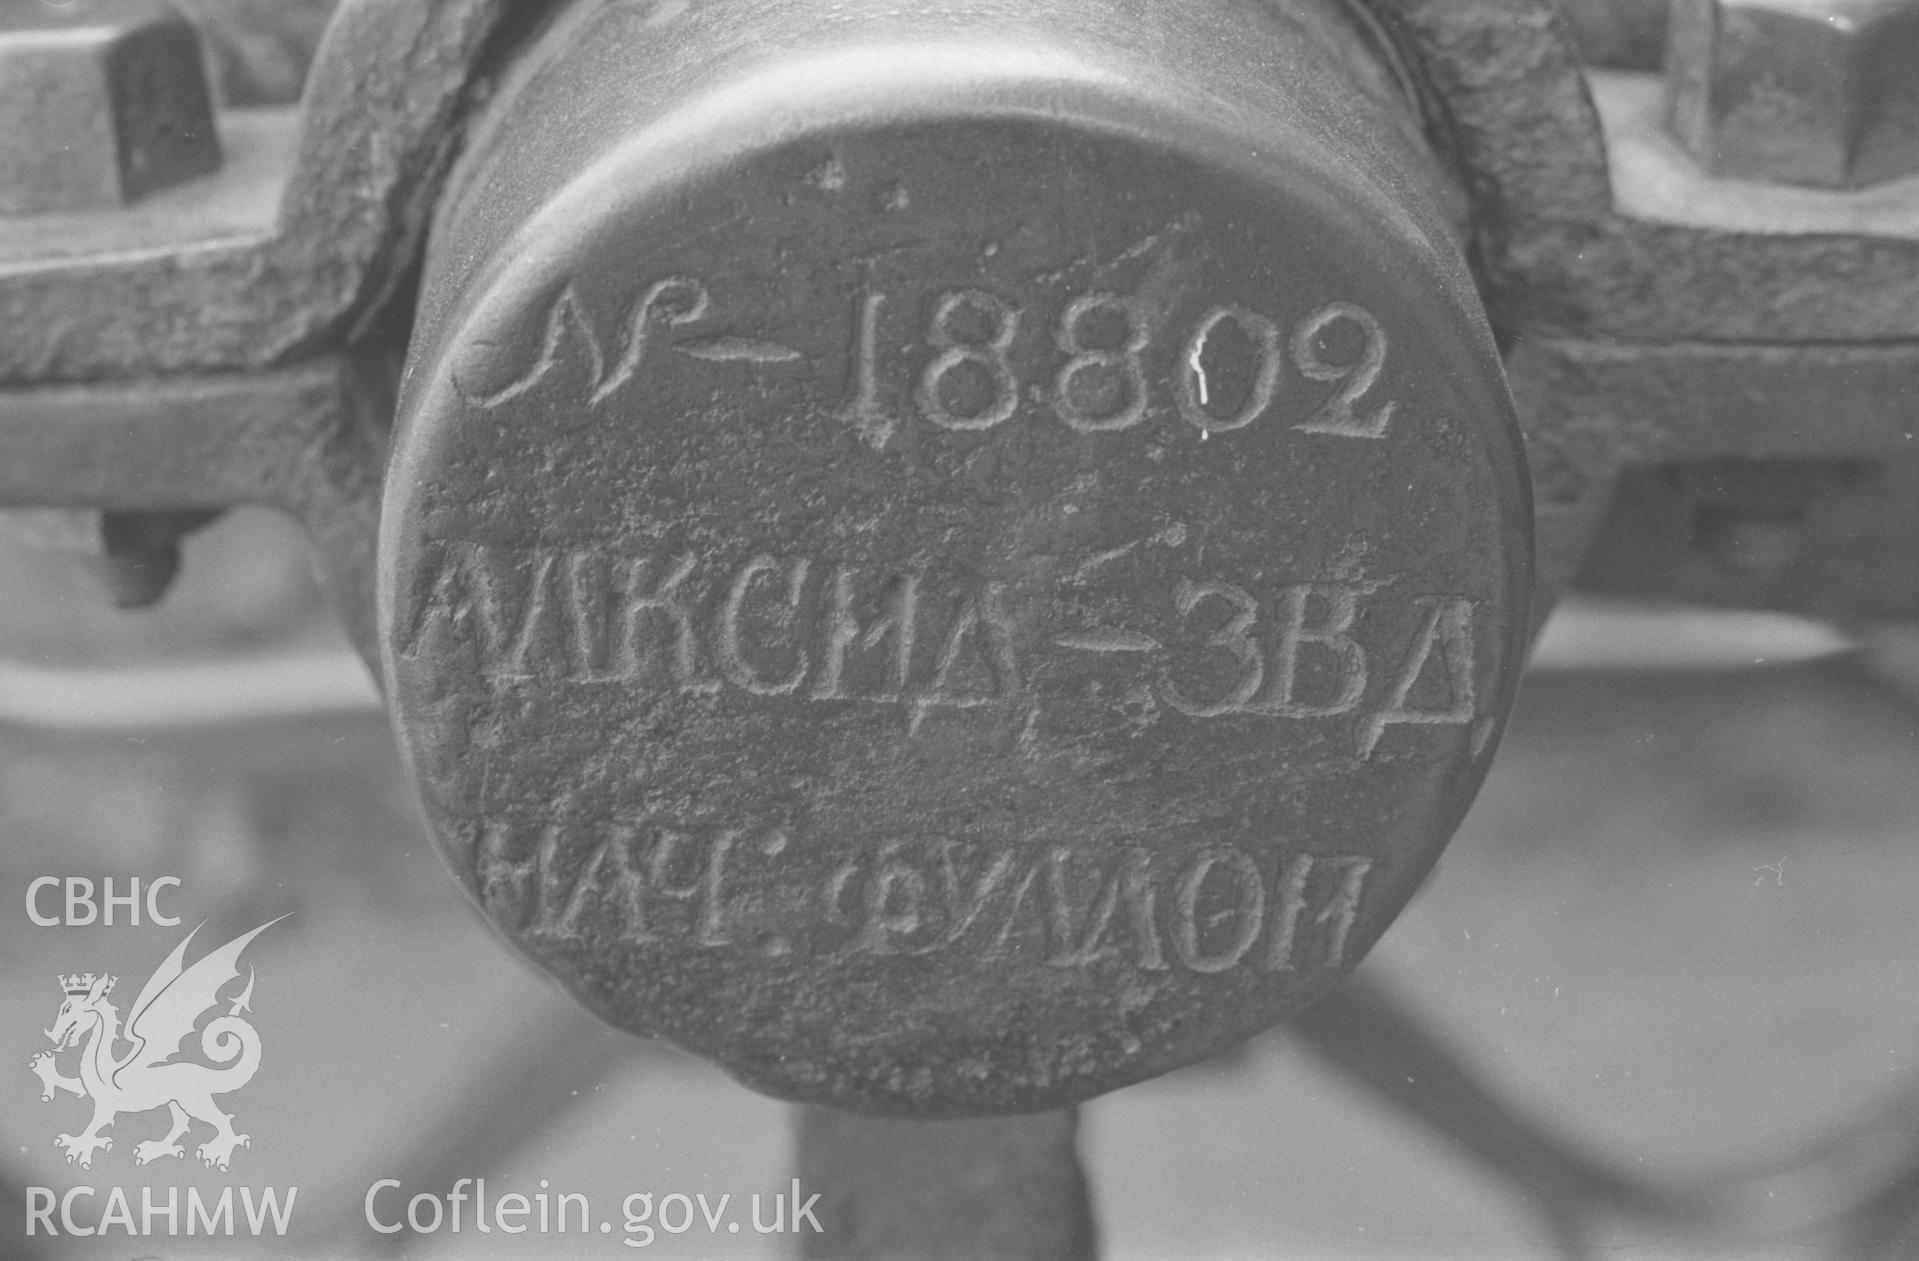 Digital copy of a black and white negative showing inscription on axle of iron cannon outside Cardigan Town Hall. Photographed by Arthur O. Chater on 9th April 1968, from Grid Reference SN 178 460.